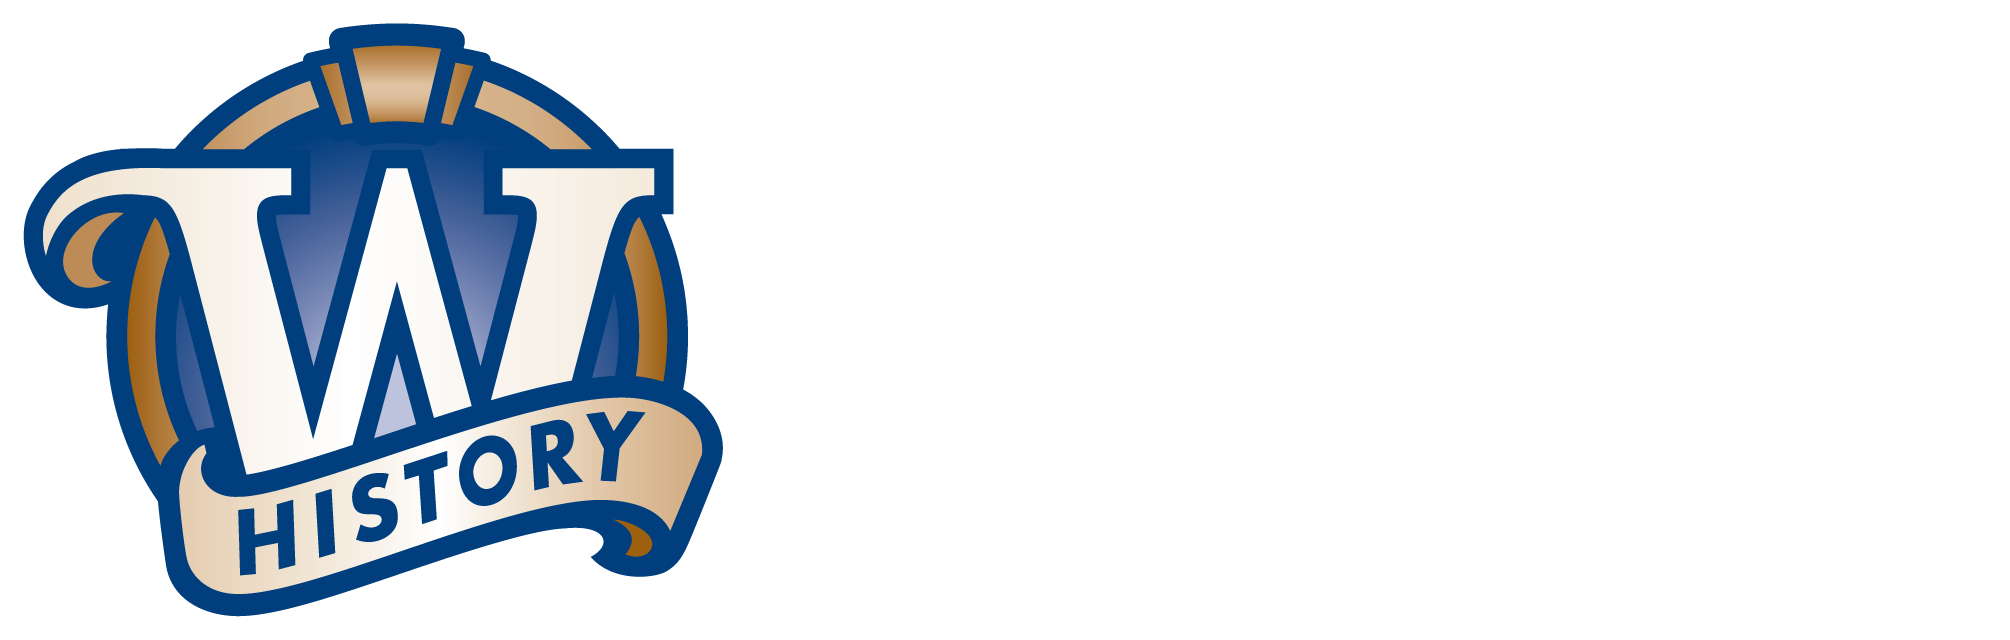 Wisconsin Historical Society Home